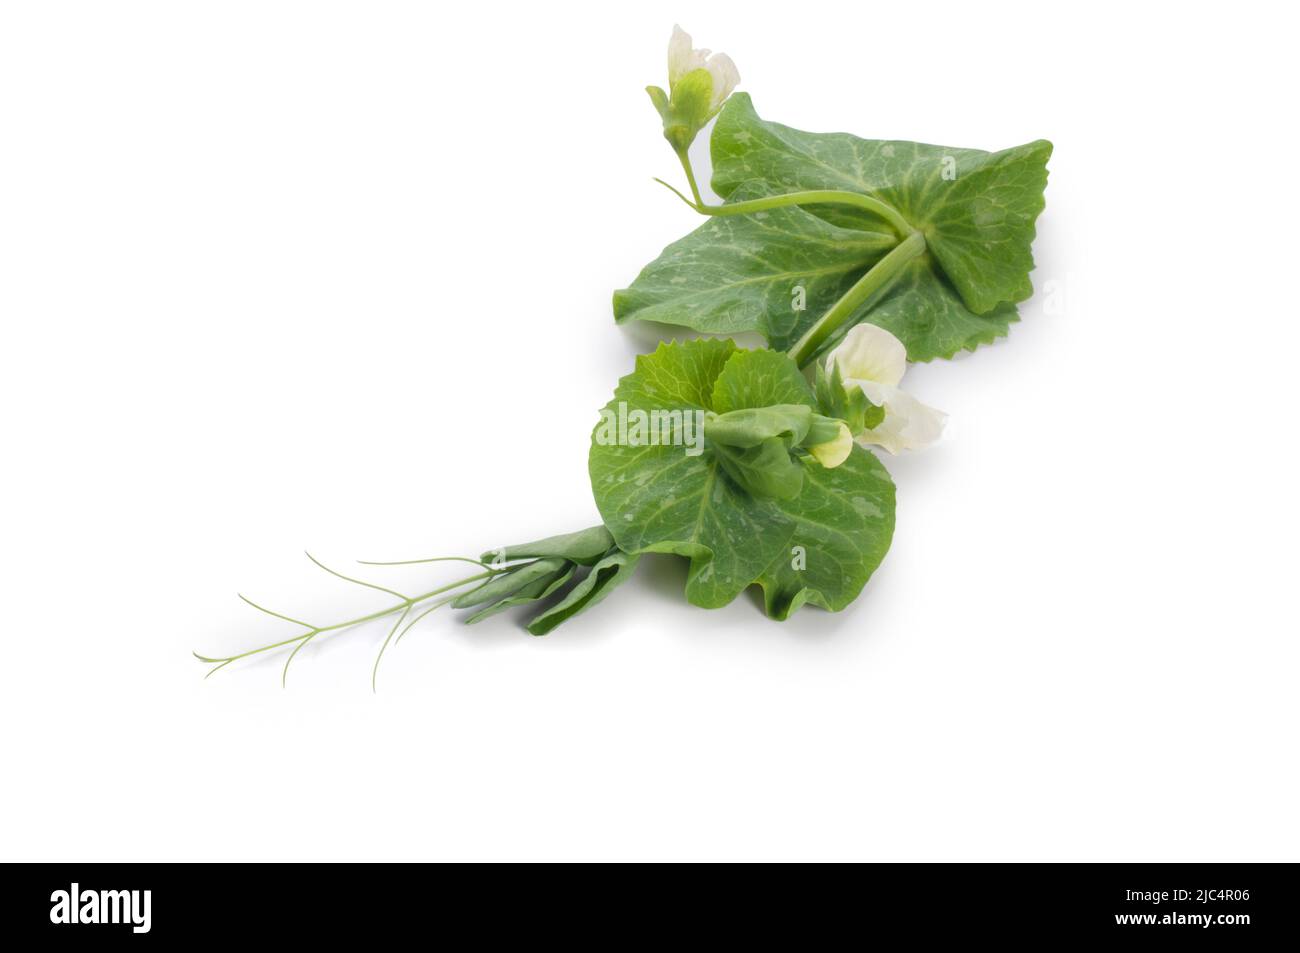 Studio shot of pea shoots cut out against a white background - John Gollop Stock Photo